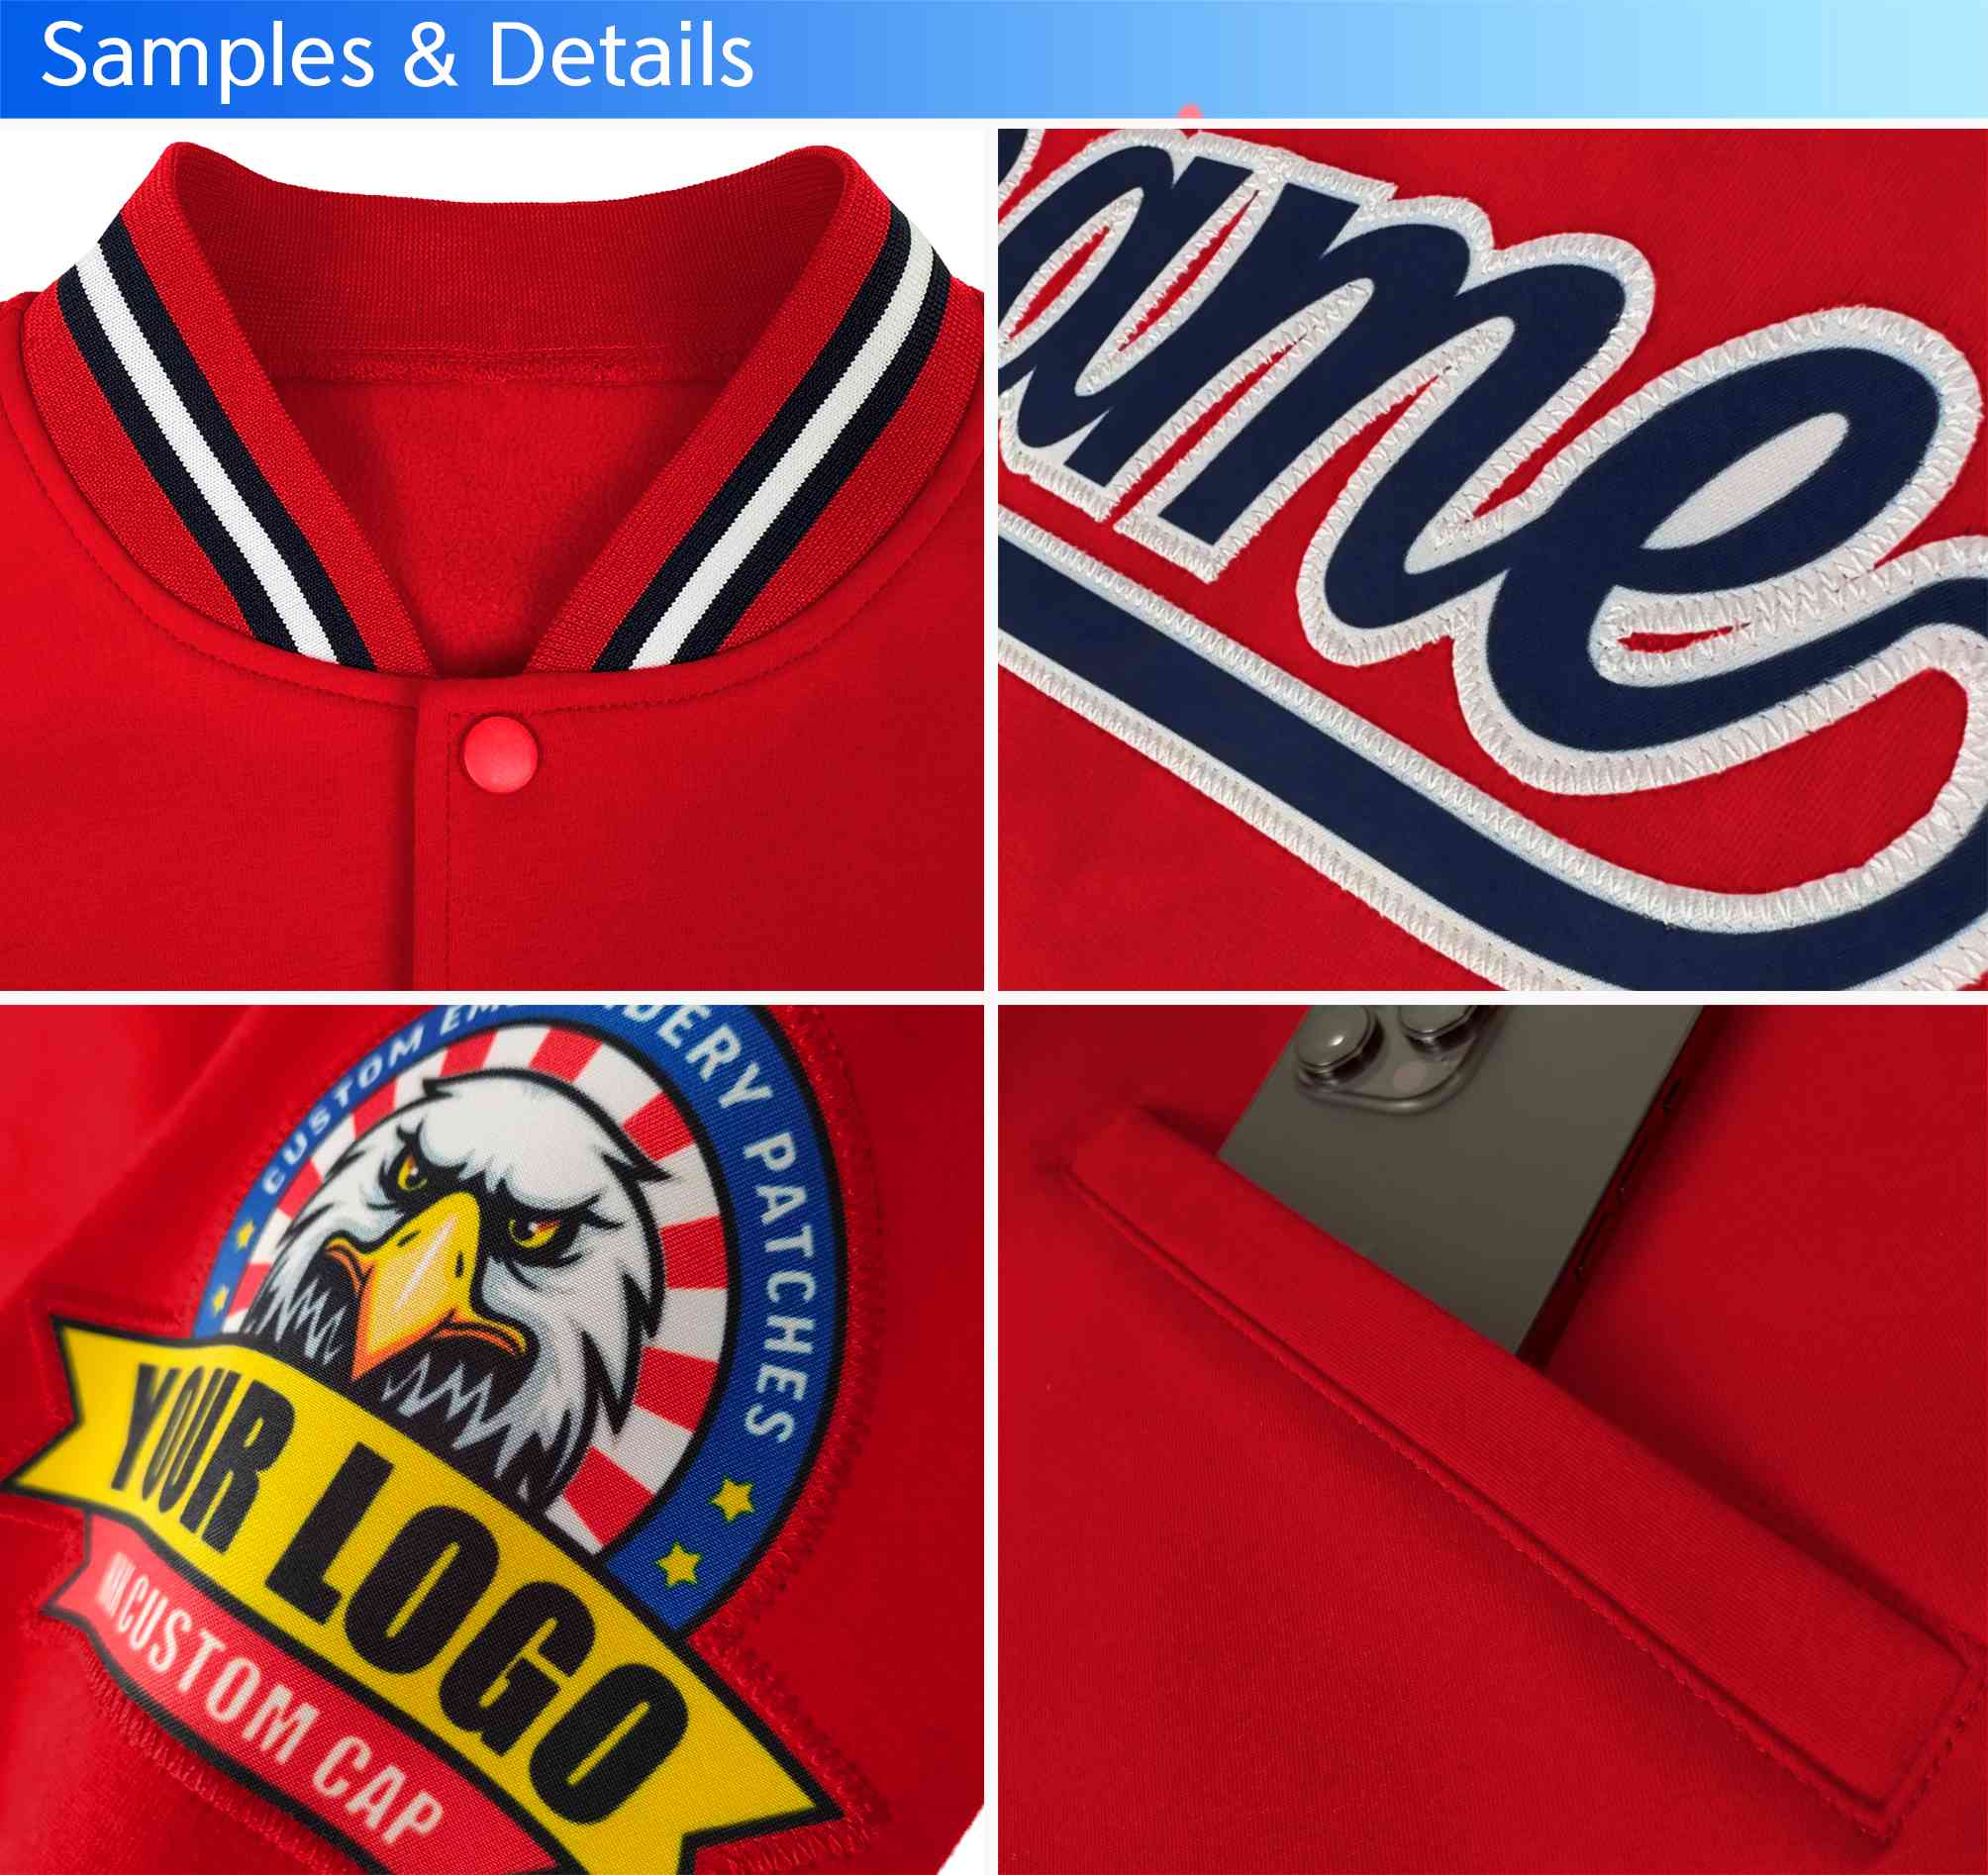 personalized varsity jackets with company logo samples & details